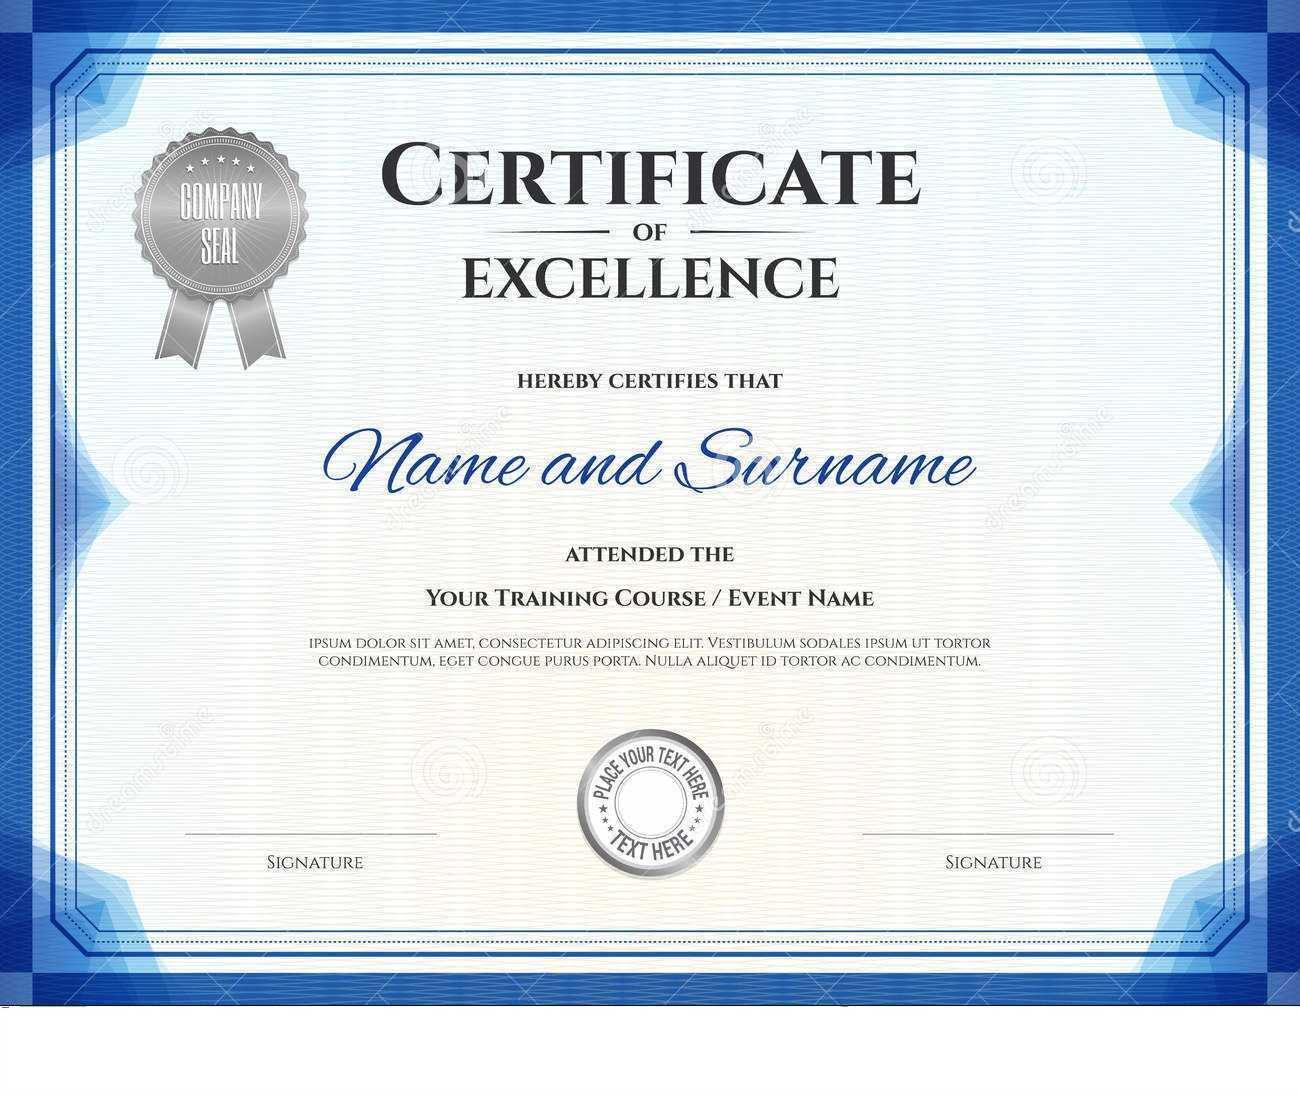 ❤️ Free Sample Certificate Of Excellence Templates❤️ In Award Of Excellence Certificate Template